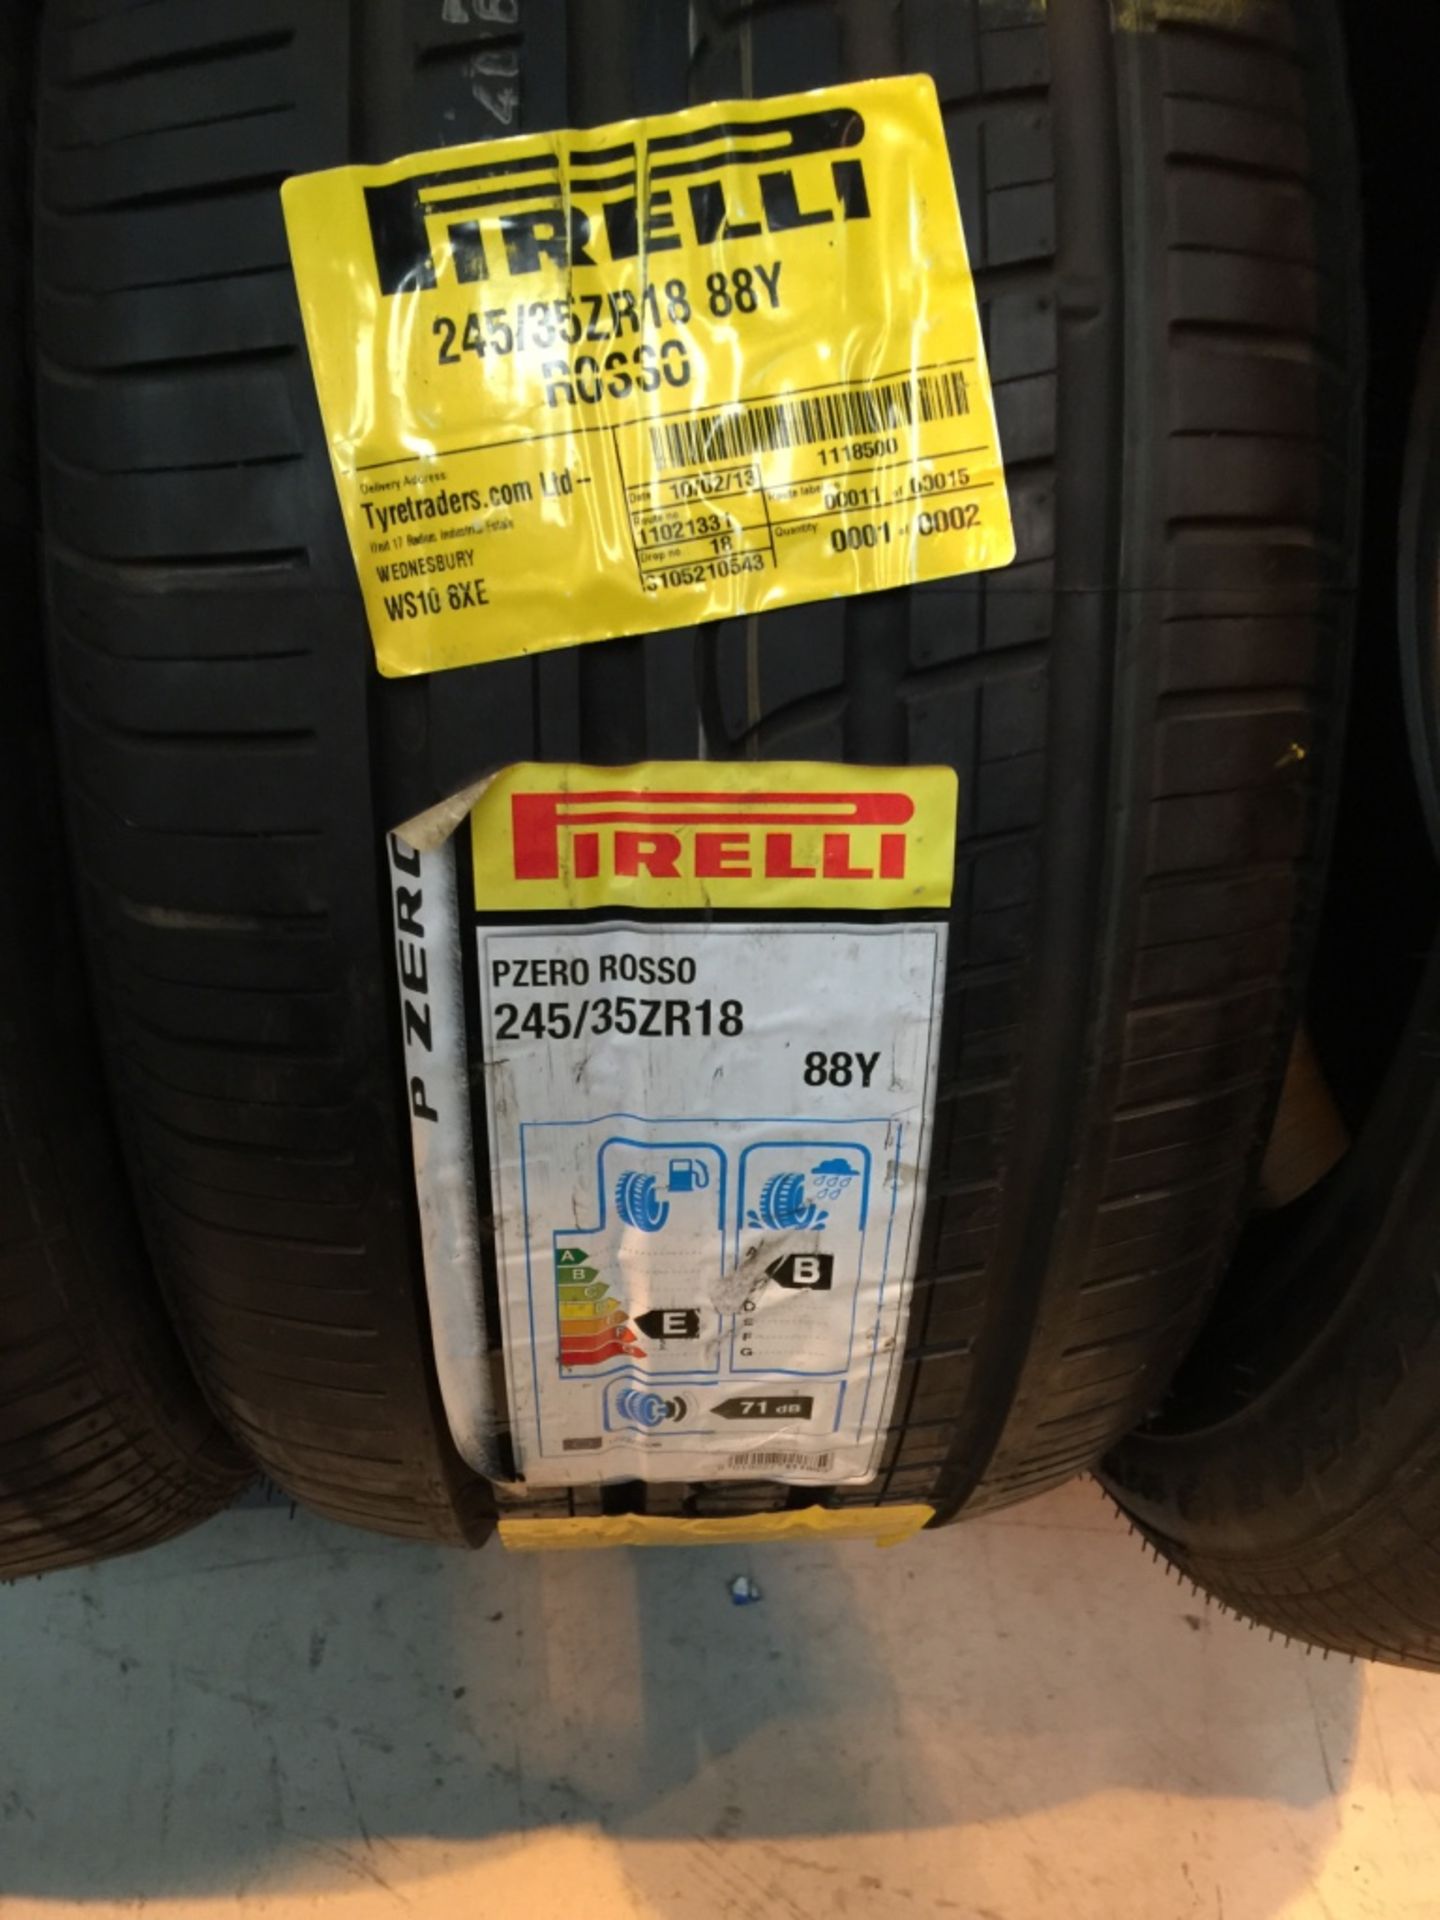 54: Pirelli Tyres Car & 4X4 - Many Large Sizes to include 18,19,21" Please see further Pictures ( - Image 55 of 55